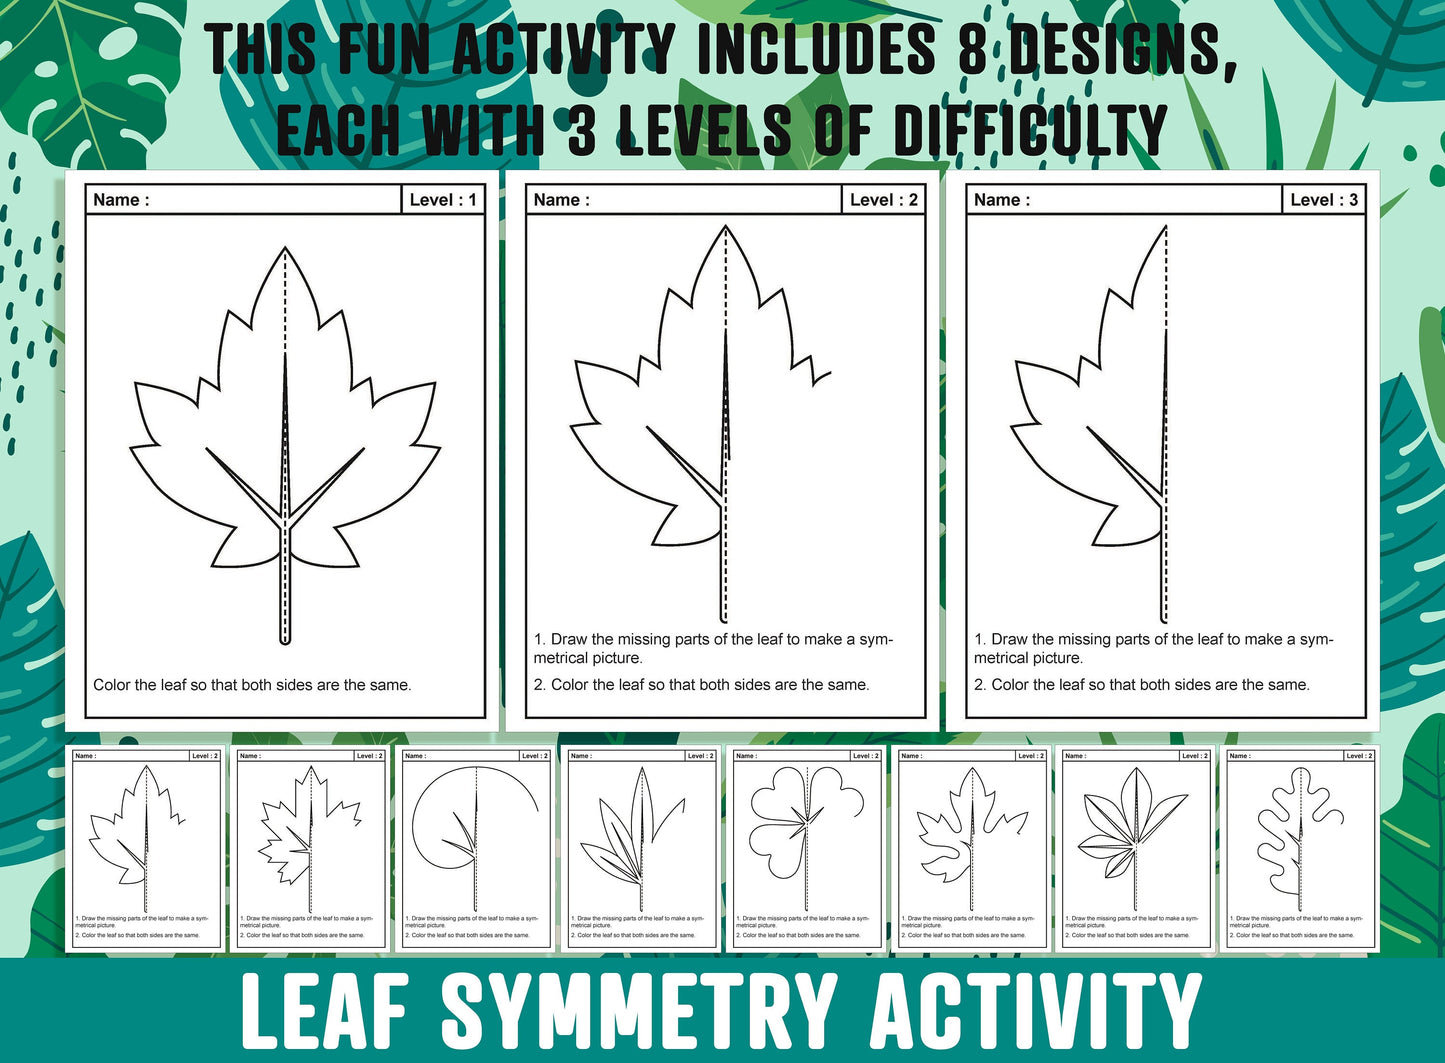 Leaf Symmetry Worksheet, Leaves Theme Lines of Symmetry Activity, 24 Pages, Includes 8 Designs, Each With 3 Levels of Difficulty, Art & Math